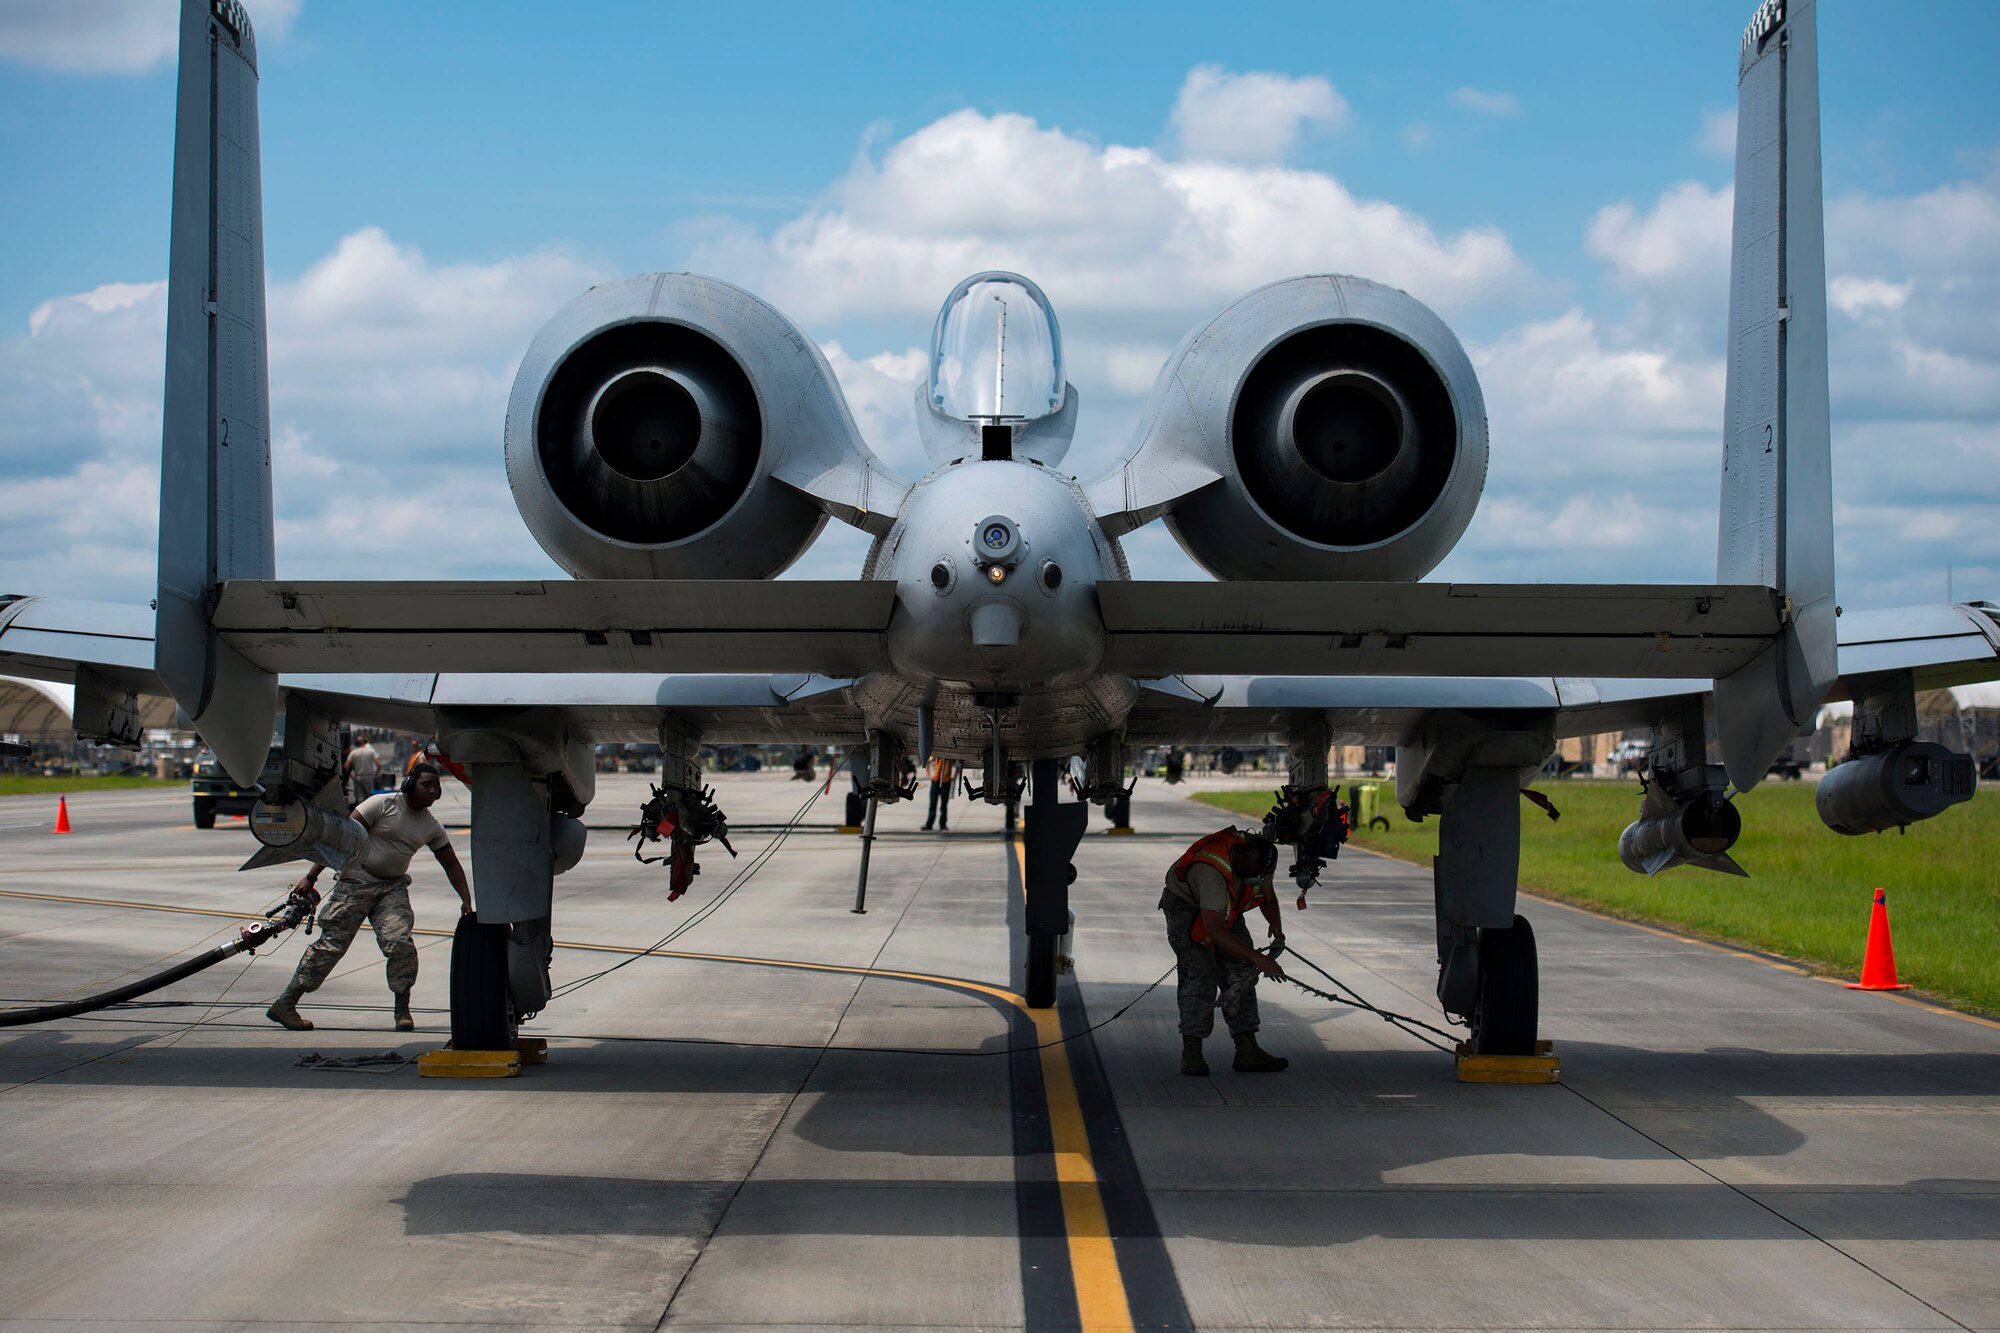 Airmen from the 23d Logistic Readiness Squadron (LRS) and 476th Maintenance Squadron gear up to hot pit refuel an A-10C Thunderbolt II, Aug. 14, 2018, at Moody Air Force Base, Ga. Members of the 23d LRS preposition fueling trucks to allow aircraft to refuel without needing to shut down. This style of refueling is used to eliminate the need for additional maintenance procedures and to extend pilots’ training time per flight which improves operations tempo. (U.S. Air Force photo by Airman 1st Class Erick Requadt)